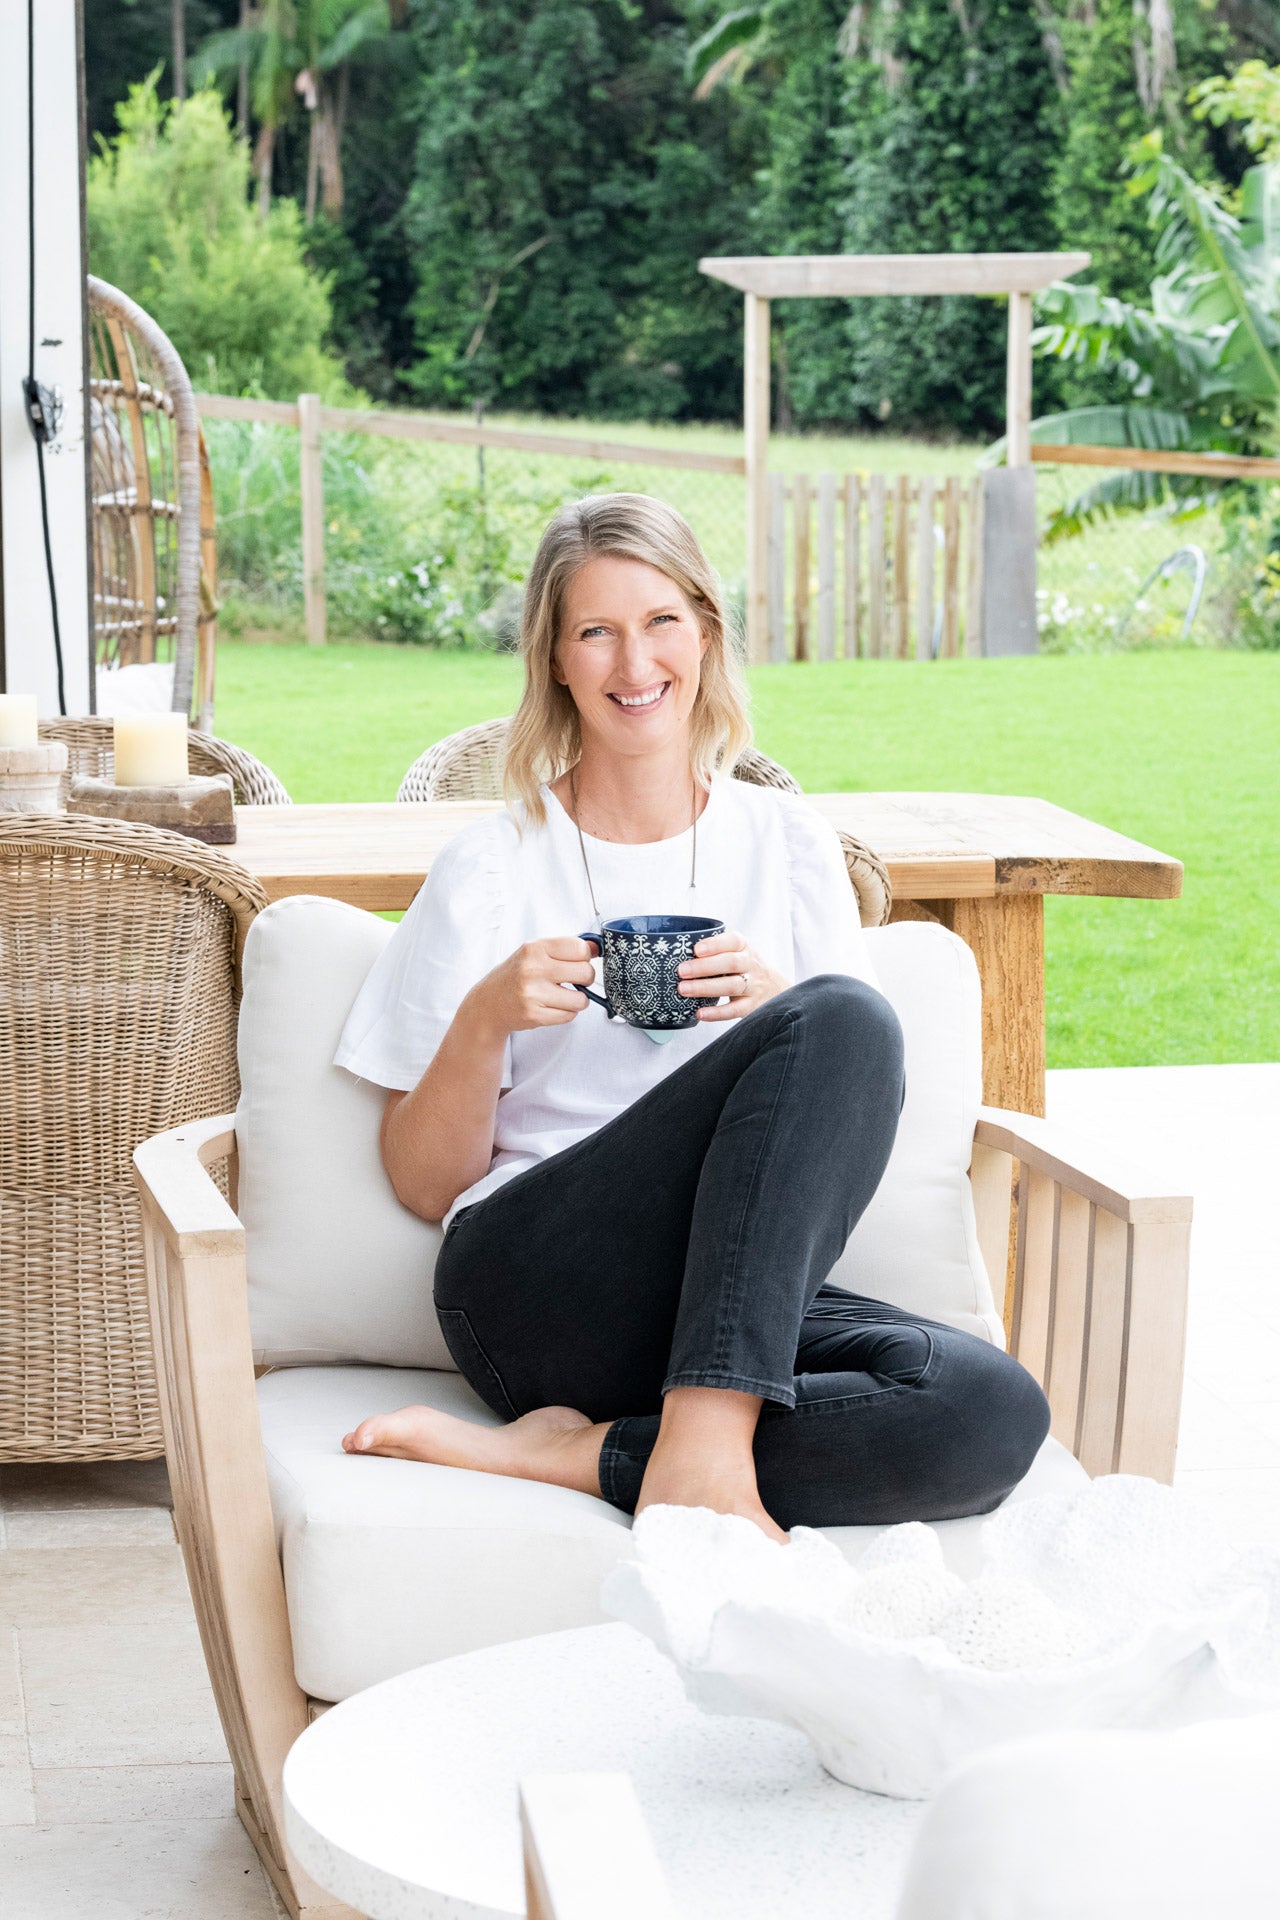 Lighthouse Lane founder Anna wears casual jeans and a tshirt. She is relaxed sitting in a timber outdoor chair holding a mug of tea. There is a lush garden in the background.